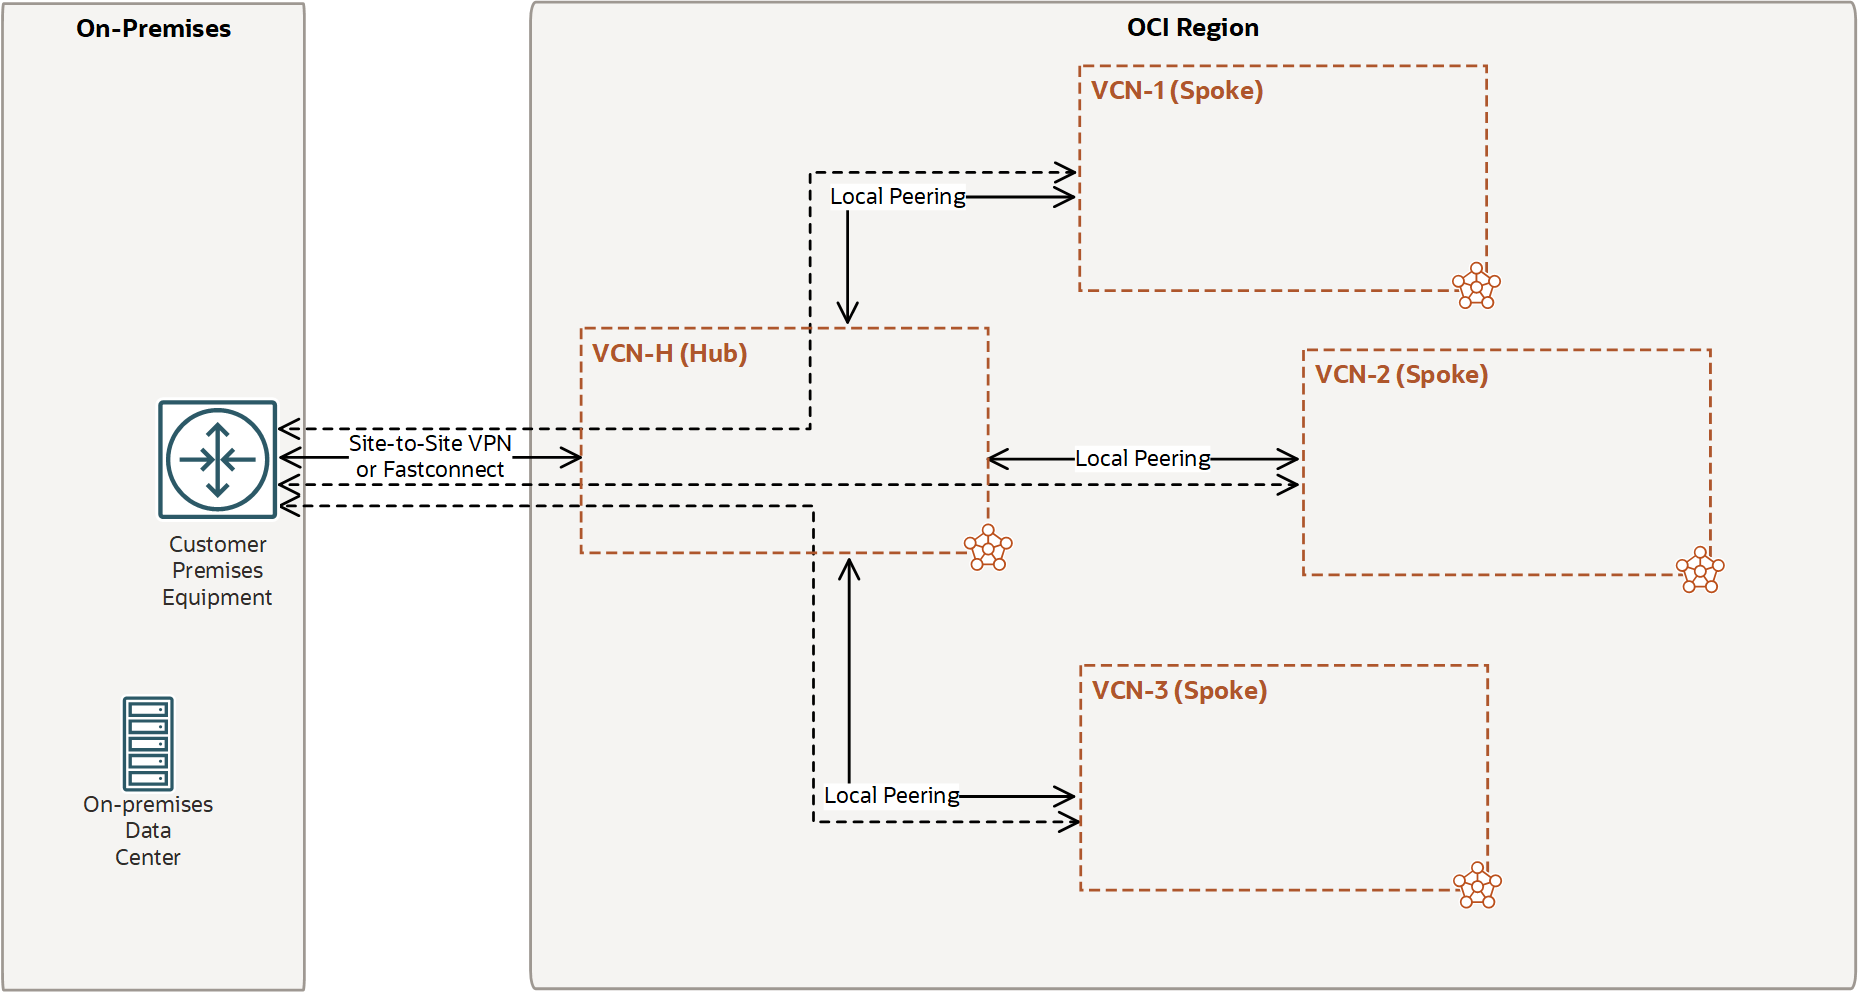 This image shows the basic hub and spoke layout of VCNs connected to your on-premises network.